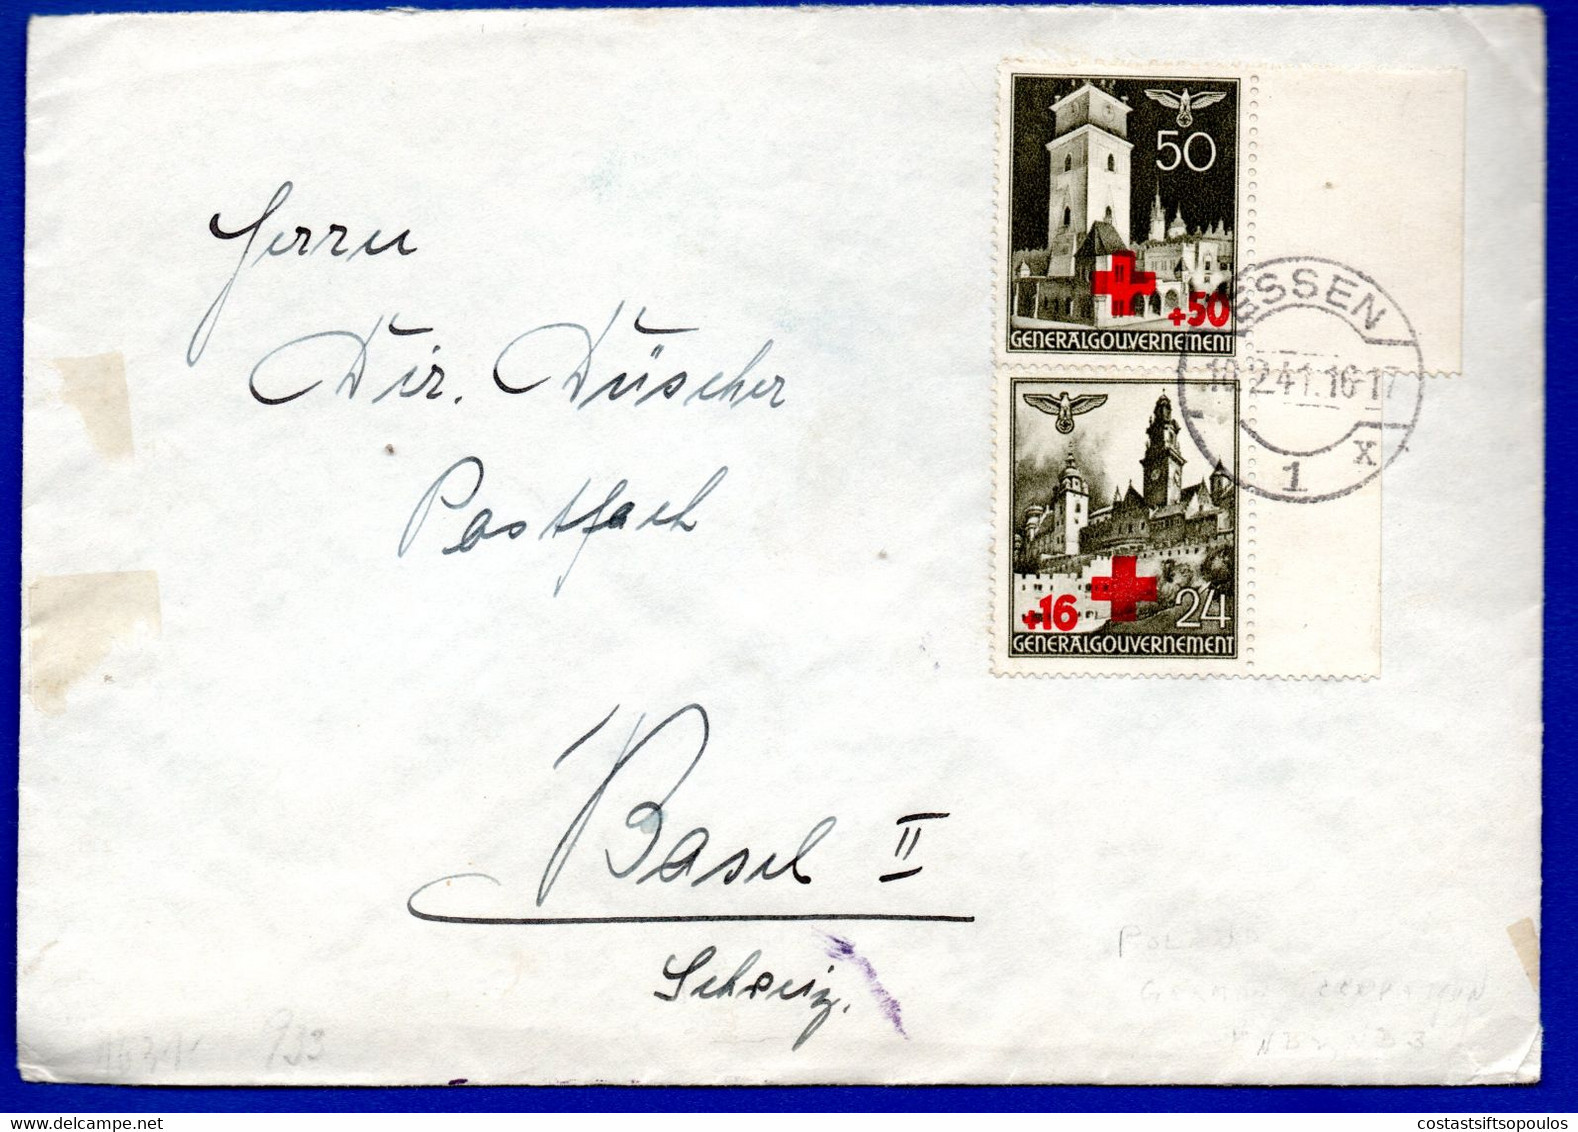 1324.POLAND POSTAL HISTORY 1941 GENERALGOUVERNEMENT RED CROSS USED IN GERMANY, COVER ESSEN TO SWITZERLAND, WW II - Gouvernement Général